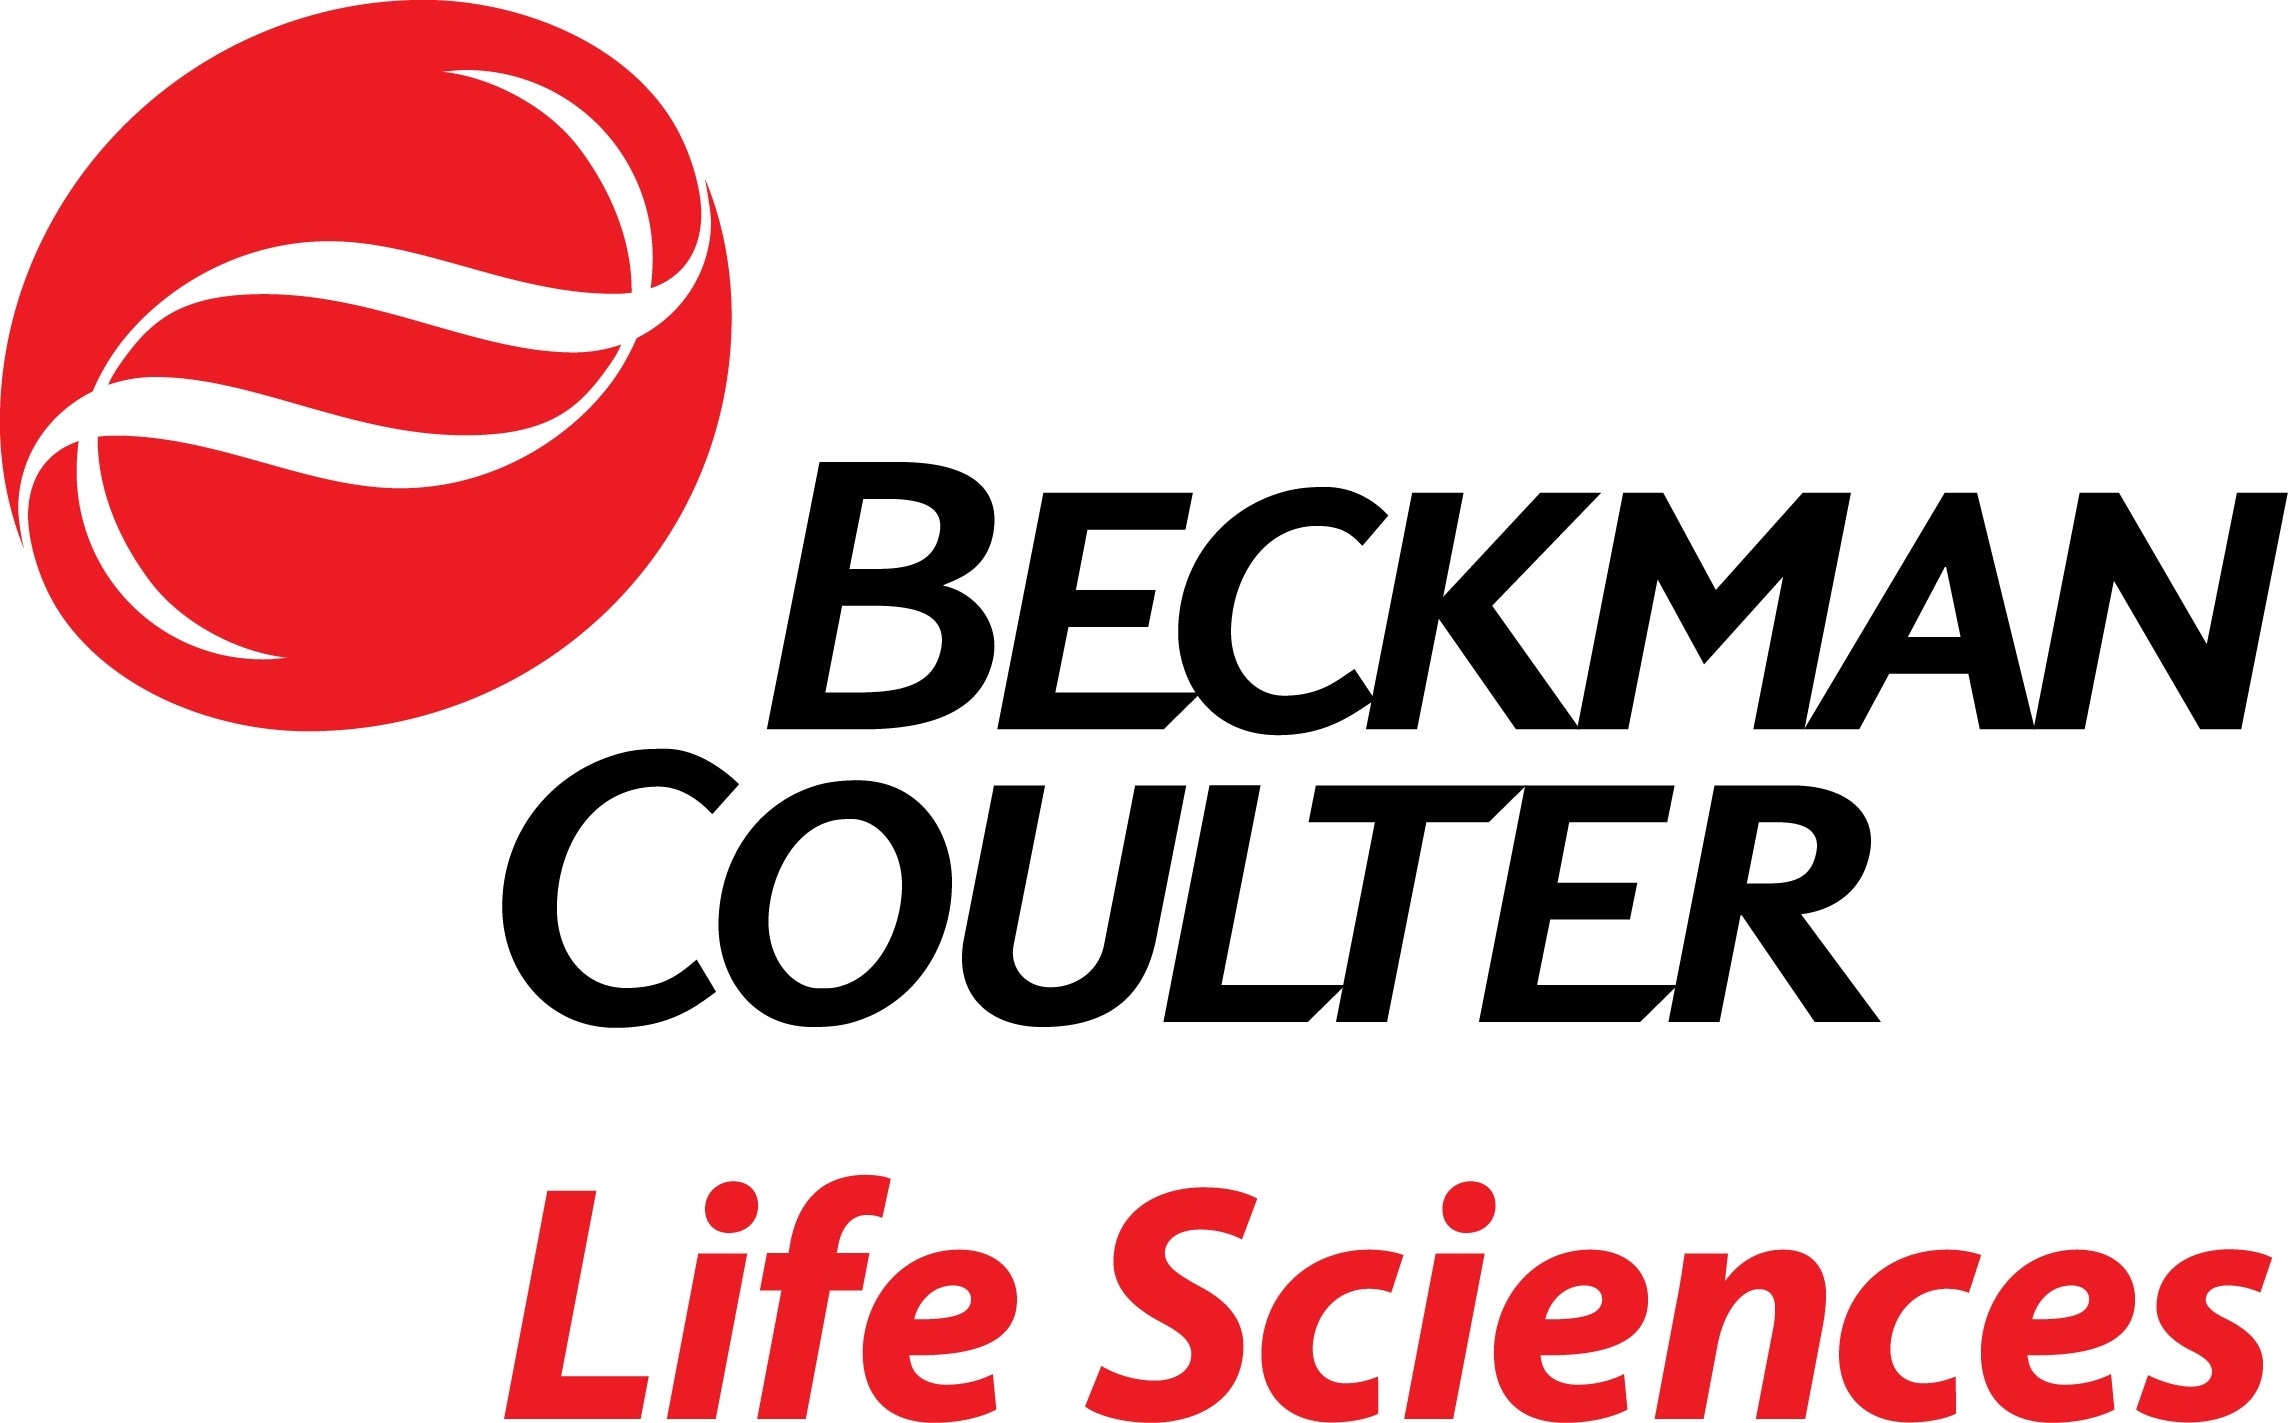 Beckman Coulter Life Sciences - Centrifugation